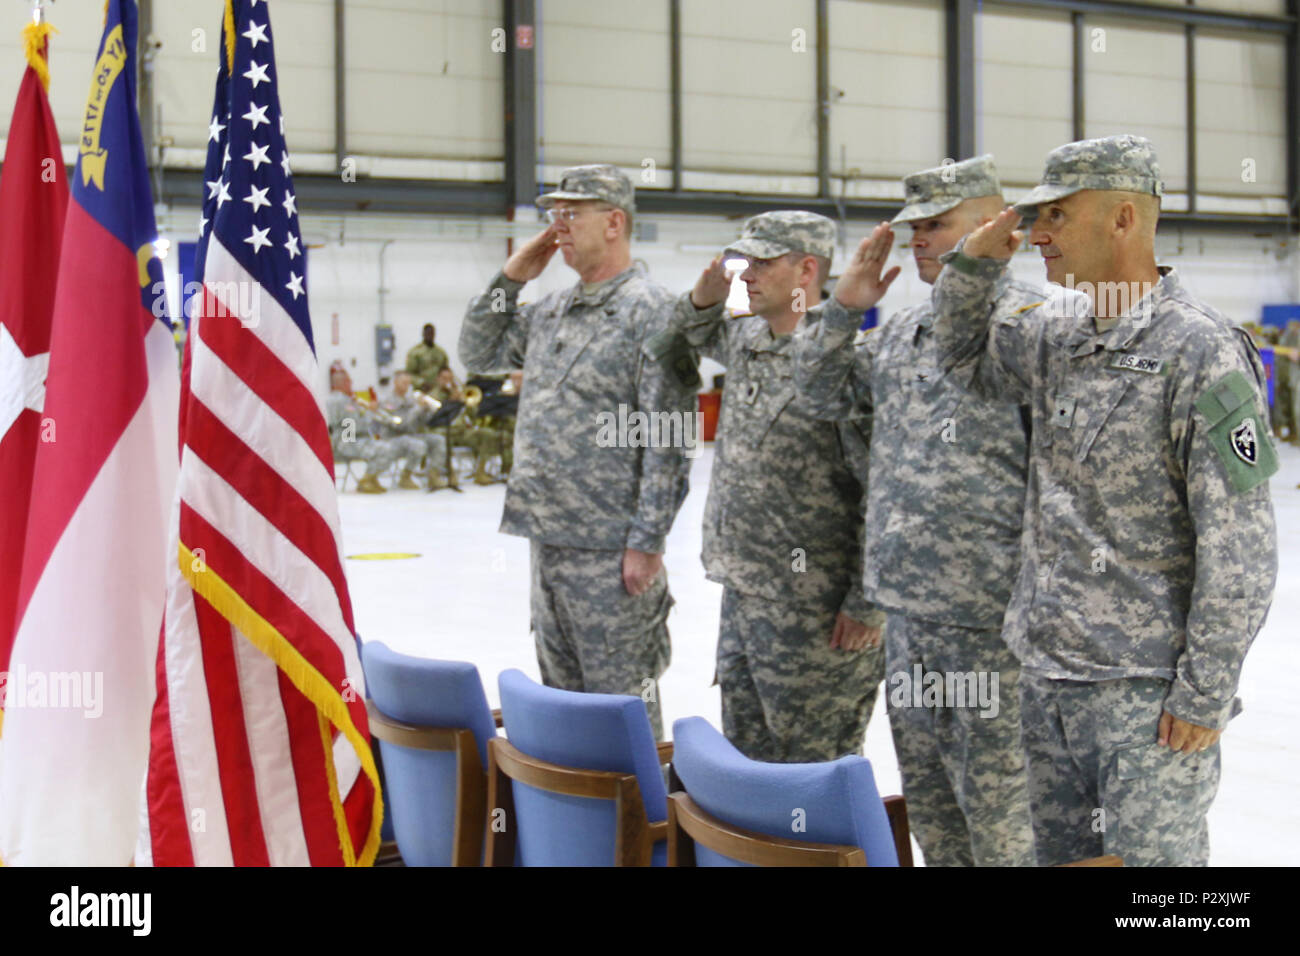 Brig. Gen. James C. Ernst, Lt. Col. Joseph W. Bishop, Col. Jeffrey L. Copeland and Command Sgt. Maj. Derwood L. Norris salute during the change of command ceremony at the North Carolina Army National Guard's Army Aviation Support Facility 1 in Morrisville, N.C., on August 7, 2016. Bishop, who served for the last 18 years in the United States Army and Army National Guard and previously commanded the 1-130th Attack Reconnaissance Battalion, became newly minted commander of 449th Theater Aviation Brigade. (U.S. Army National Guard photo by Sgt. Lisa Vines, 449th Theater Aviation Brigade) Stock Photo